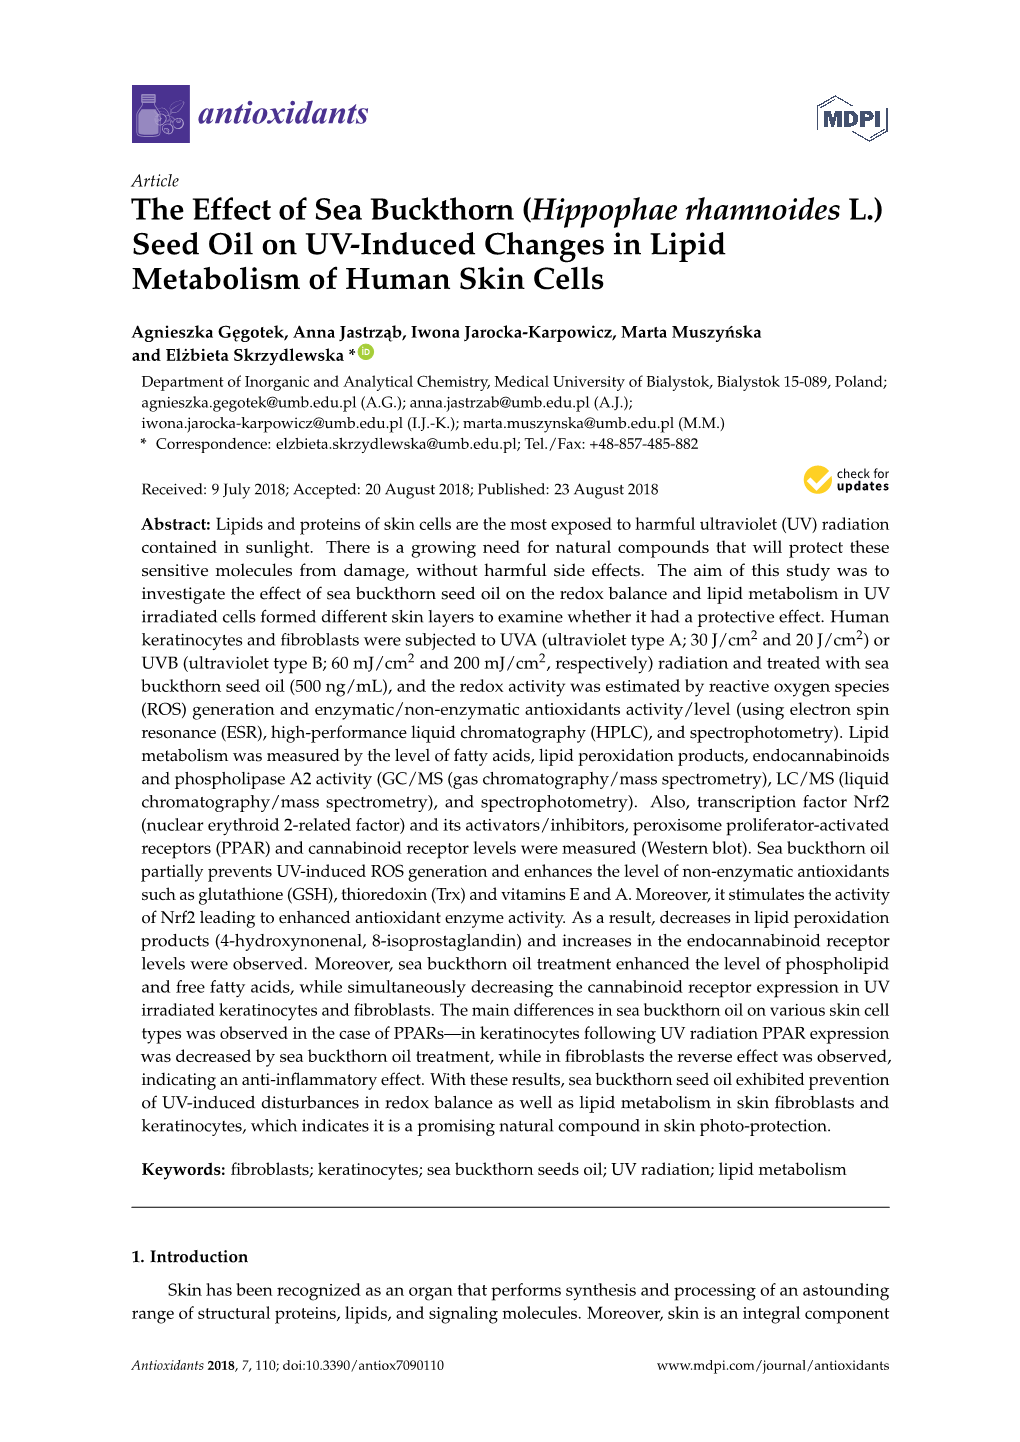 Seed Oil on UV-Induced Changes in Lipid Metabolism of Human Skin Cells